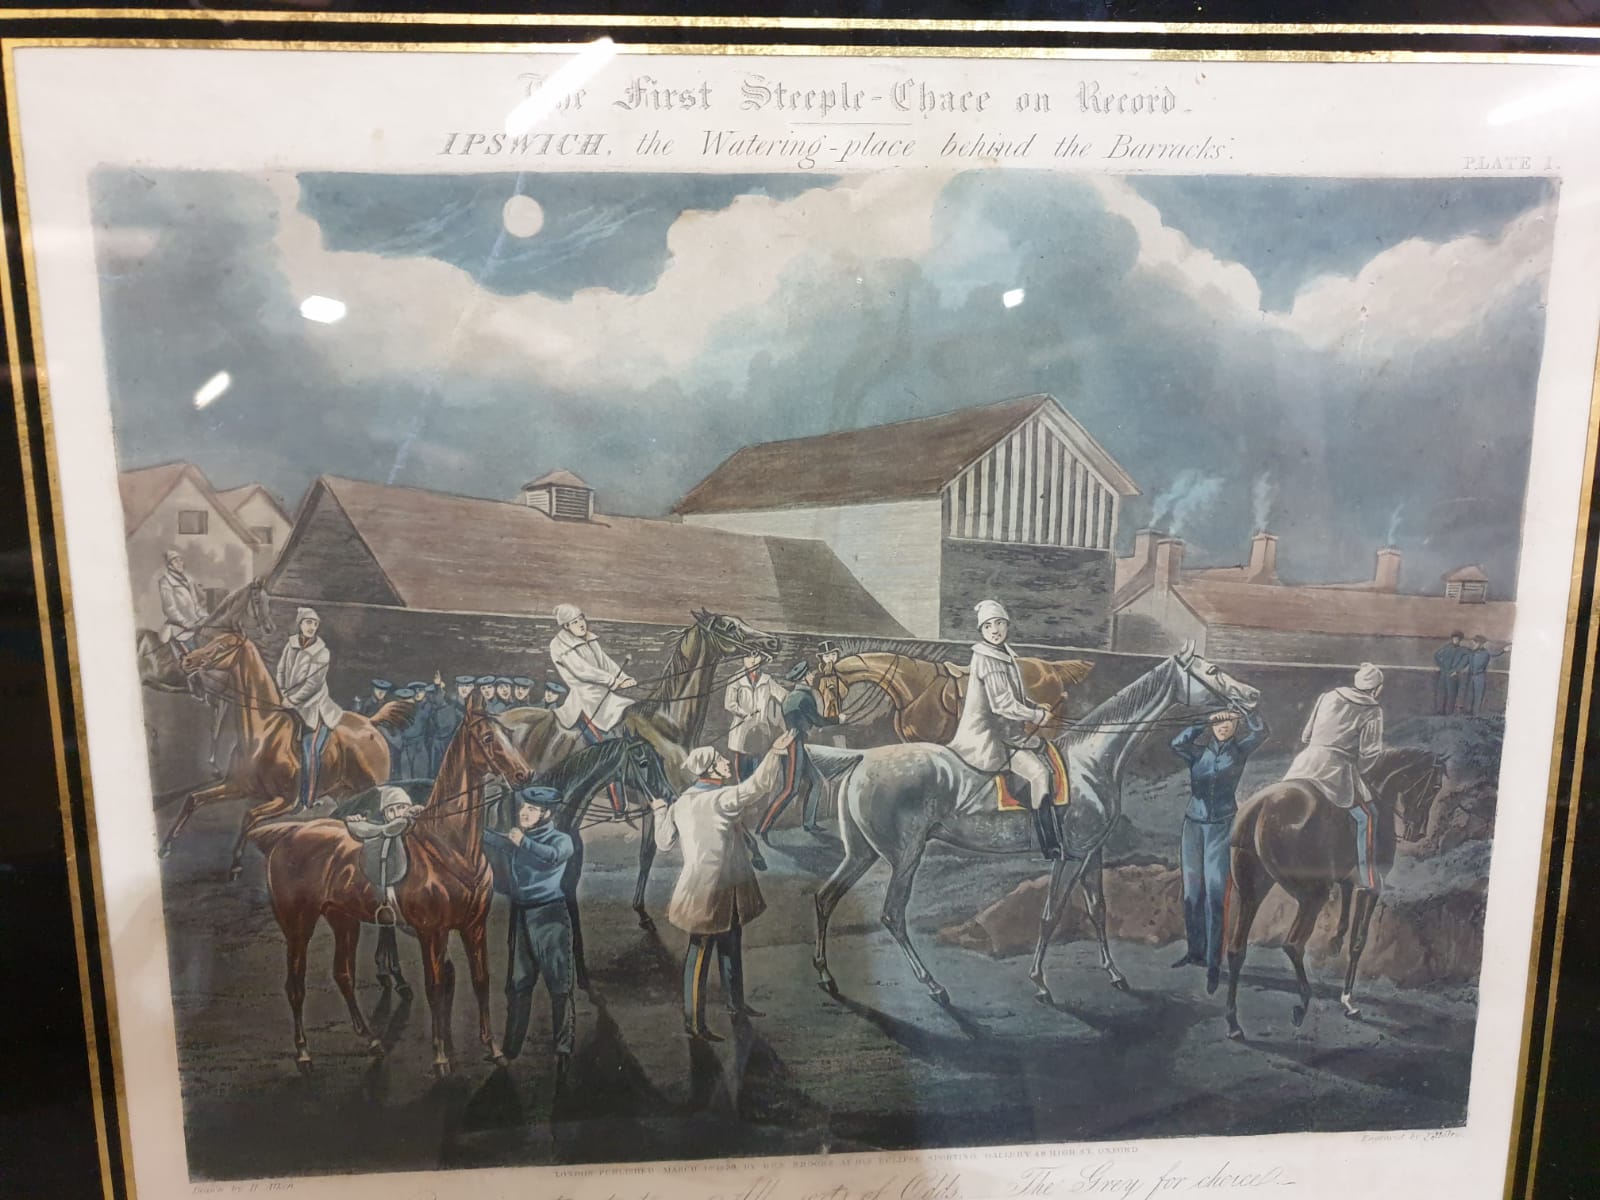 Framed vintage print .The First Steeplechase on Record - Ipswich, the watering place behind the - Image 6 of 6